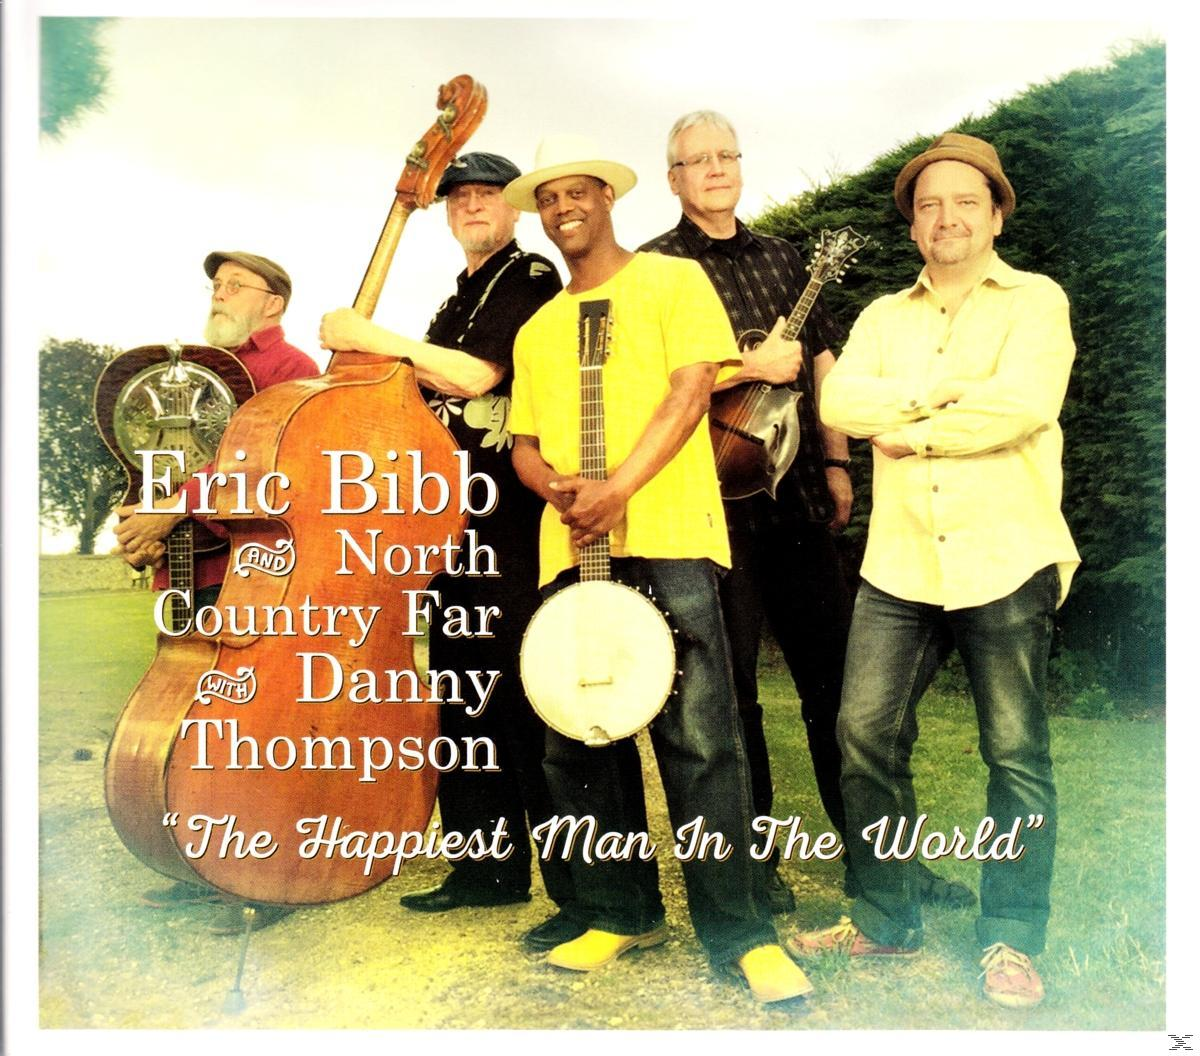 In Man The Bibb, Danny North Happiest - Country World Far, Thompson (CD) Eric -